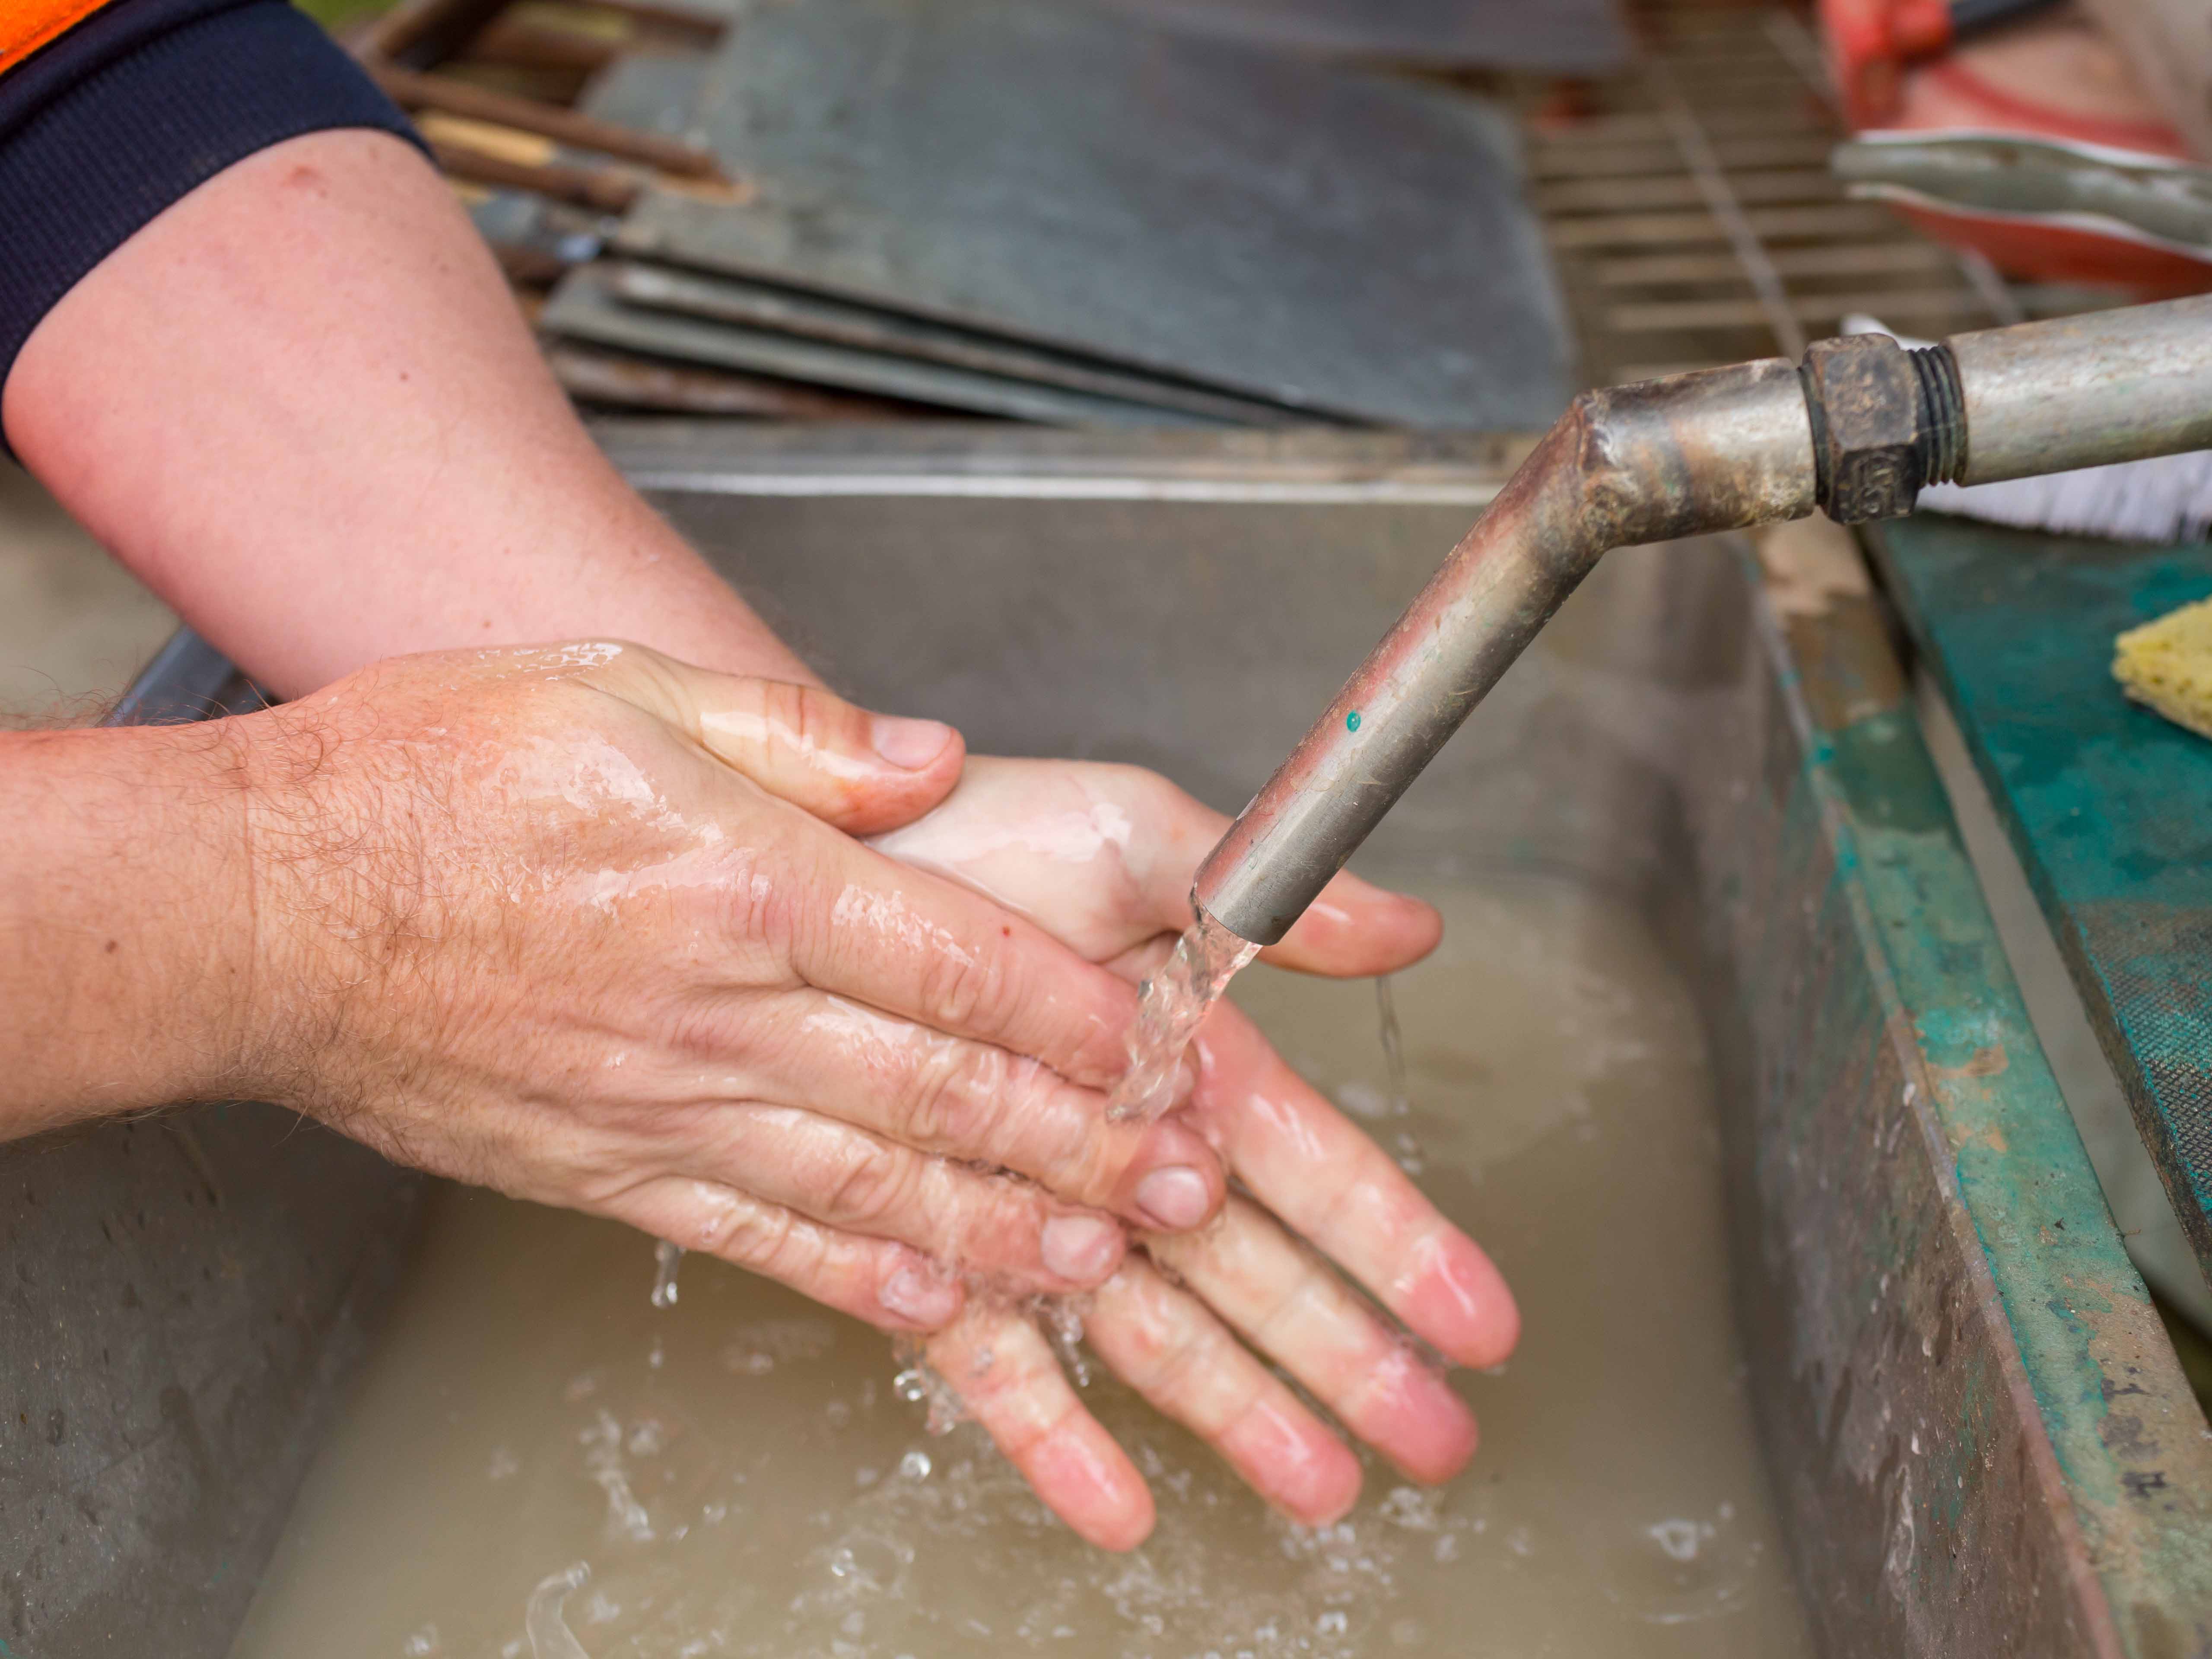 Close up of man washing hands in running water. Water falling into sink below hands.